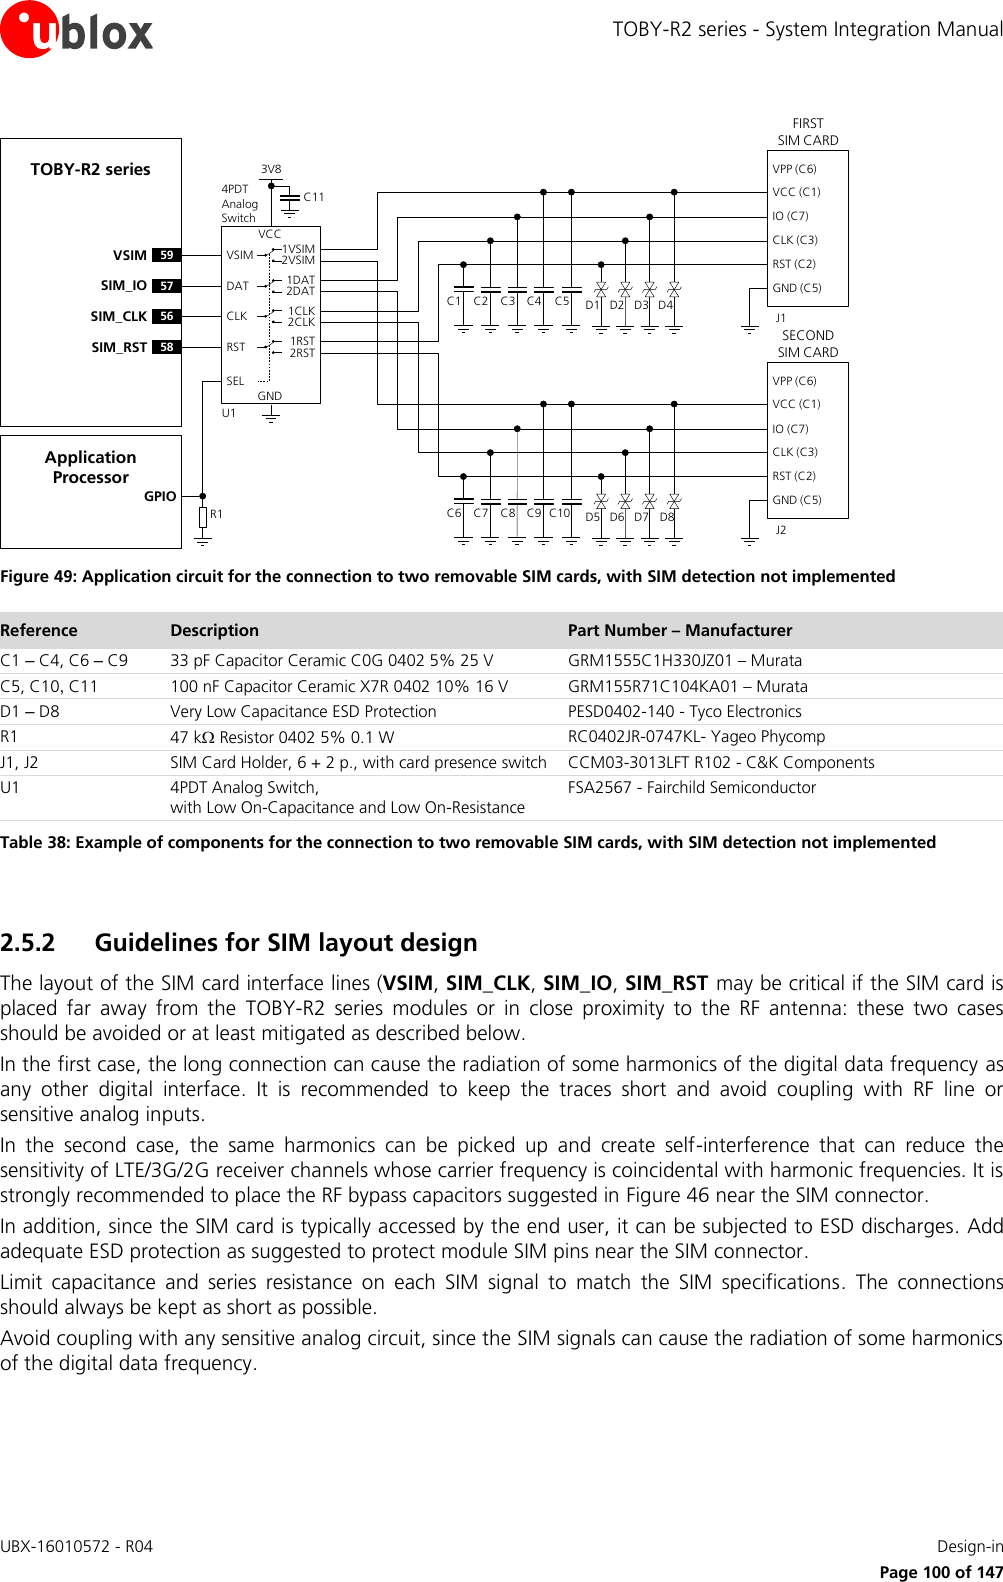 TOBY-R2 series - System Integration Manual UBX-16010572 - R04    Design-in     Page 100 of 147 TOBY-R2 seriesC1FIRST             SIM CARDVPP (C6)VCC (C1)IO (C7)CLK (C3)RST (C2)GND (C5)C2 C3 C5J1C4 D1 D2 D3 D4GNDU159VSIM VSIM 1VSIM2VSIMVCCC114PDT Analog Switch3V857SIM_IO DAT 1DAT2DAT56SIM_CLK CLK 1CLK2CLK58SIM_RST RST 1RST2RSTSELSECOND   SIM CARDVPP (C6)VCC (C1)IO (C7)CLK (C3)RST (C2)GND (C5)J2C6 C7 C8 C10C9 D5 D6 D7 D8Application ProcessorGPIOR1 Figure 49: Application circuit for the connection to two removable SIM cards, with SIM detection not implemented Reference Description Part Number – Manufacturer C1 – C4, C6 – C9 33 pF Capacitor Ceramic C0G 0402 5% 25 V GRM1555C1H330JZ01 – Murata C5, C10, C11 100 nF Capacitor Ceramic X7R 0402 10% 16 V GRM155R71C104KA01 – Murata D1 – D8 Very Low Capacitance ESD Protection PESD0402-140 - Tyco Electronics  R1 47 k Resistor 0402 5% 0.1 W RC0402JR-0747KL- Yageo Phycomp J1, J2 SIM Card Holder, 6 + 2 p., with card presence switch CCM03-3013LFT R102 - C&amp;K Components U1 4PDT Analog Switch,  with Low On-Capacitance and Low On-Resistance FSA2567 - Fairchild Semiconductor Table 38: Example of components for the connection to two removable SIM cards, with SIM detection not implemented  2.5.2 Guidelines for SIM layout design The layout of the SIM card interface lines (VSIM, SIM_CLK, SIM_IO, SIM_RST may be critical if the SIM card is placed  far  away  from  the  TOBY-R2  series  modules  or  in  close  proximity  to  the  RF  antenna:  these  two  cases should be avoided or at least mitigated as described below.  In the first case, the long connection can cause the radiation of some harmonics of the digital data frequency as any  other  digital  interface.  It  is  recommended  to  keep  the  traces  short  and  avoid  coupling  with  RF  line  or sensitive analog inputs. In  the  second  case,  the  same  harmonics  can  be  picked  up  and  create  self-interference  that  can  reduce  the sensitivity of LTE/3G/2G receiver channels whose carrier frequency is coincidental with harmonic frequencies. It is strongly recommended to place the RF bypass capacitors suggested in Figure 46 near the SIM connector. In addition, since the SIM card is typically accessed by the end user, it can be subjected to ESD discharges. Add adequate ESD protection as suggested to protect module SIM pins near the SIM connector. Limit  capacitance  and  series  resistance  on  each  SIM  signal  to  match  the  SIM  specifications.  The  connections should always be kept as short as possible. Avoid coupling with any sensitive analog circuit, since the SIM signals can cause the radiation of some harmonics of the digital data frequency.  